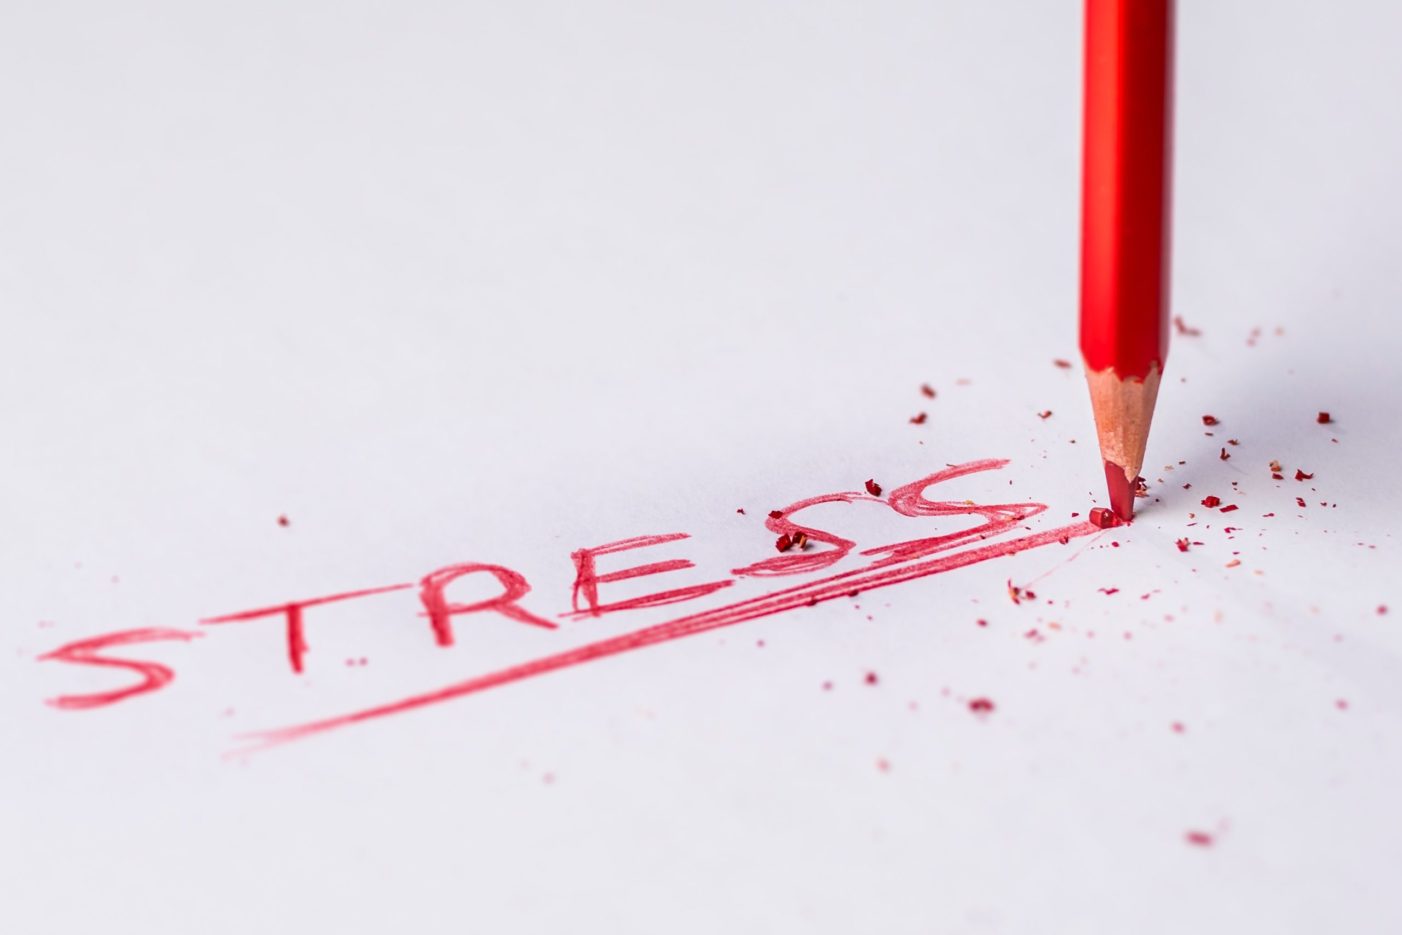 STRESS – WHAT IS IT AND HOW TO DEAL WITH IT?